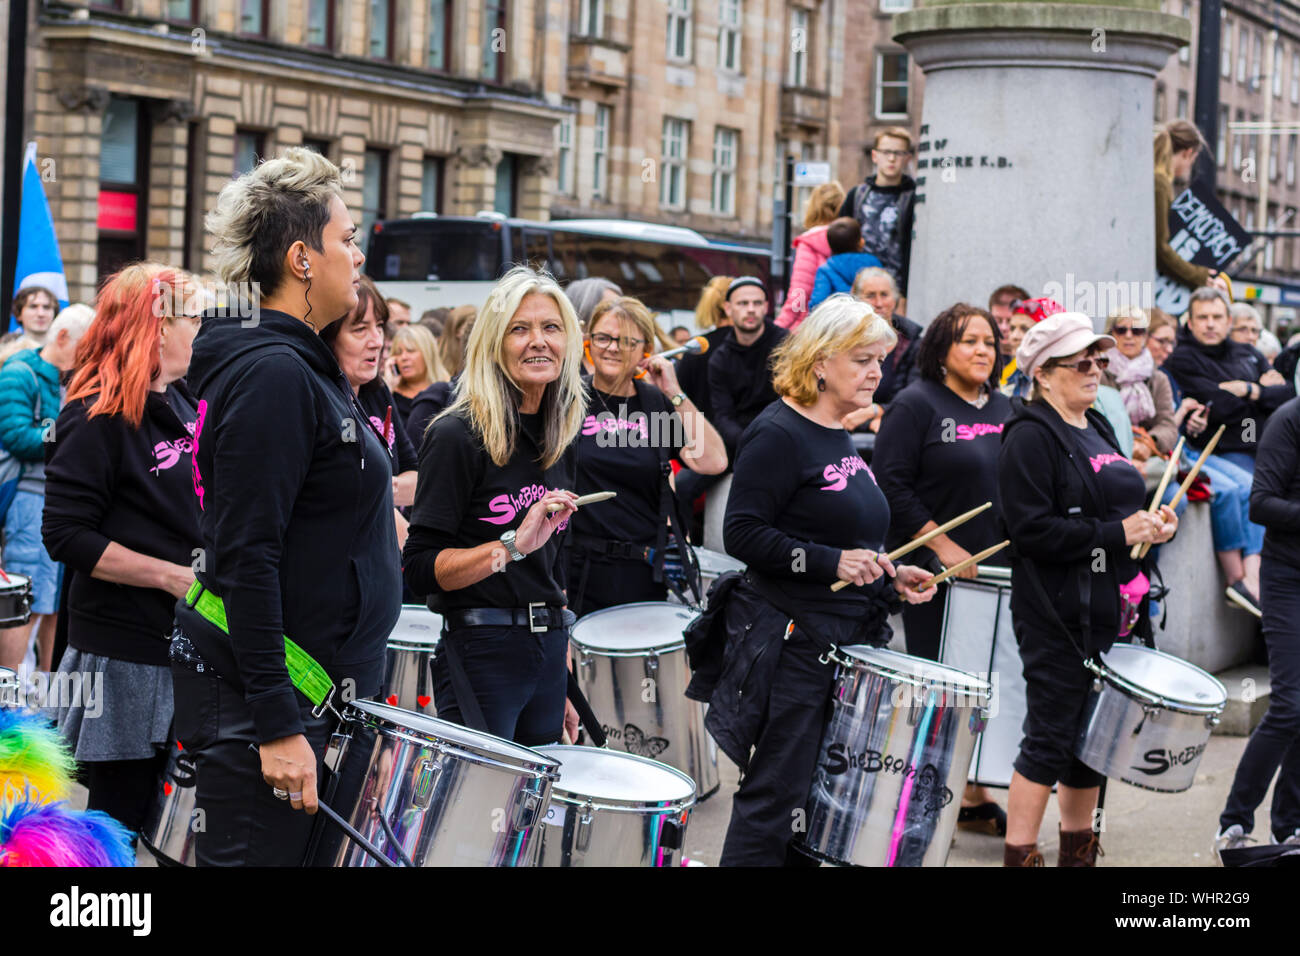 Glasgow, Scotland, August, 31, 2019. 'Stop the coup': Protests in Glasgow, George Square. Female group of drummers called Sheboom. Stock Photo